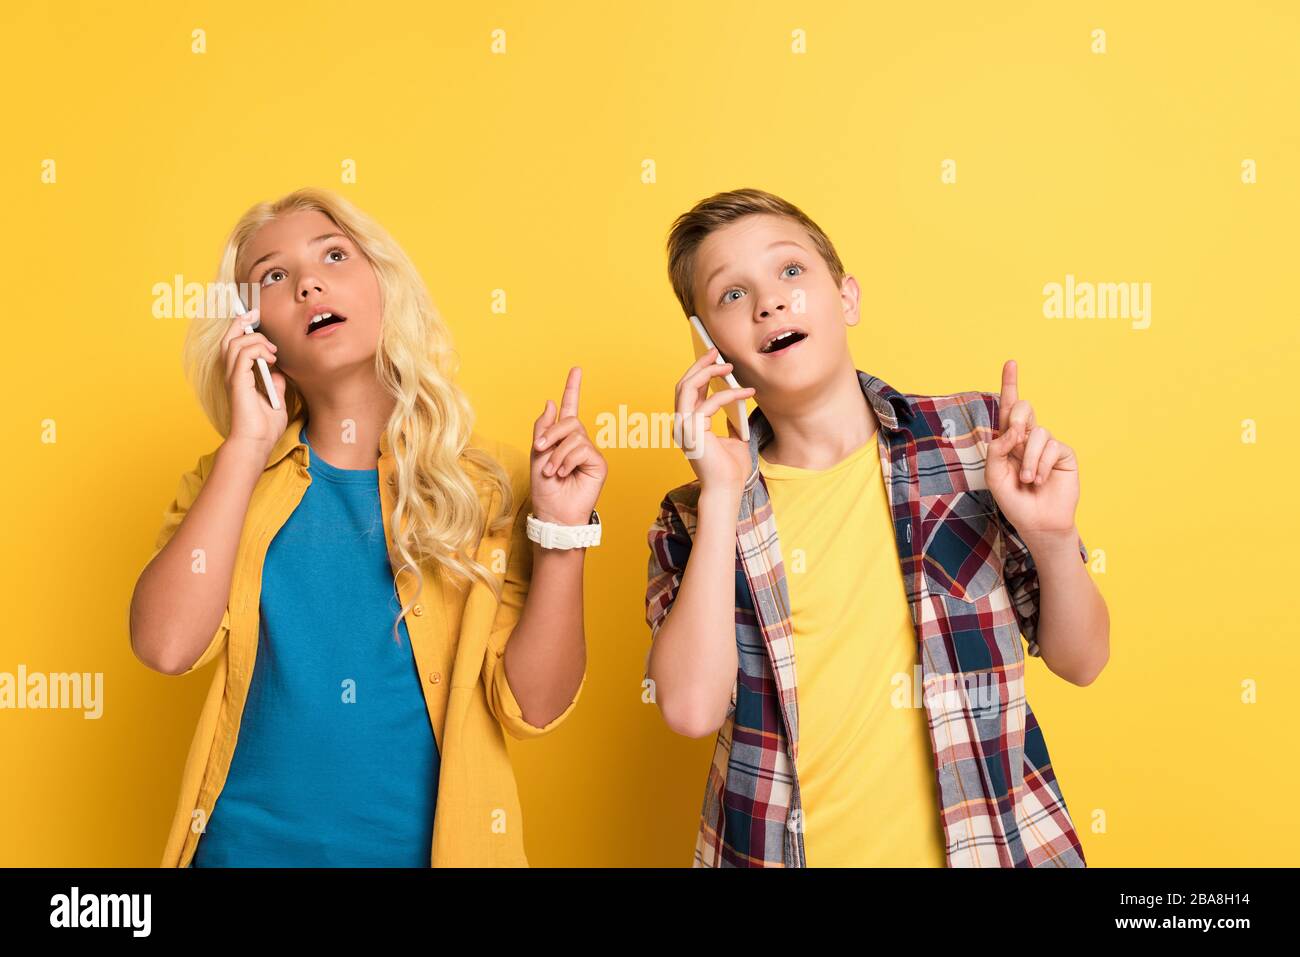 dreamy kids showing idea gesture and talking on smartphones on yellow background Stock Photo